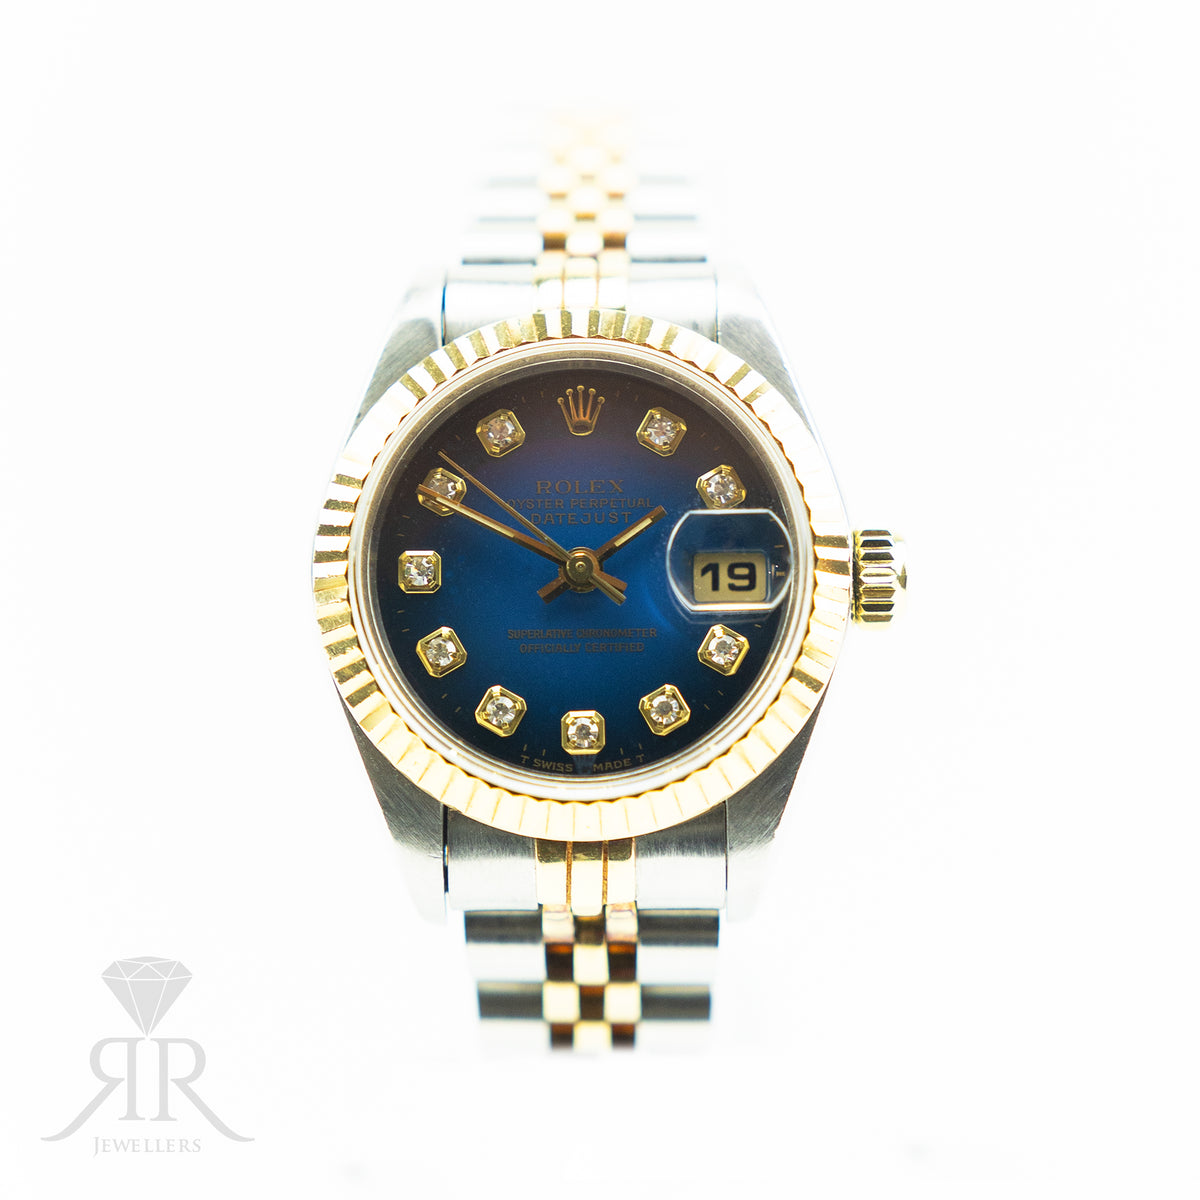 1995 Rolex DATEJUST 26mm Steel & Yellow Gold, Fluted Bezel, Diamond Dot Available At RR Jewellers Yarm 